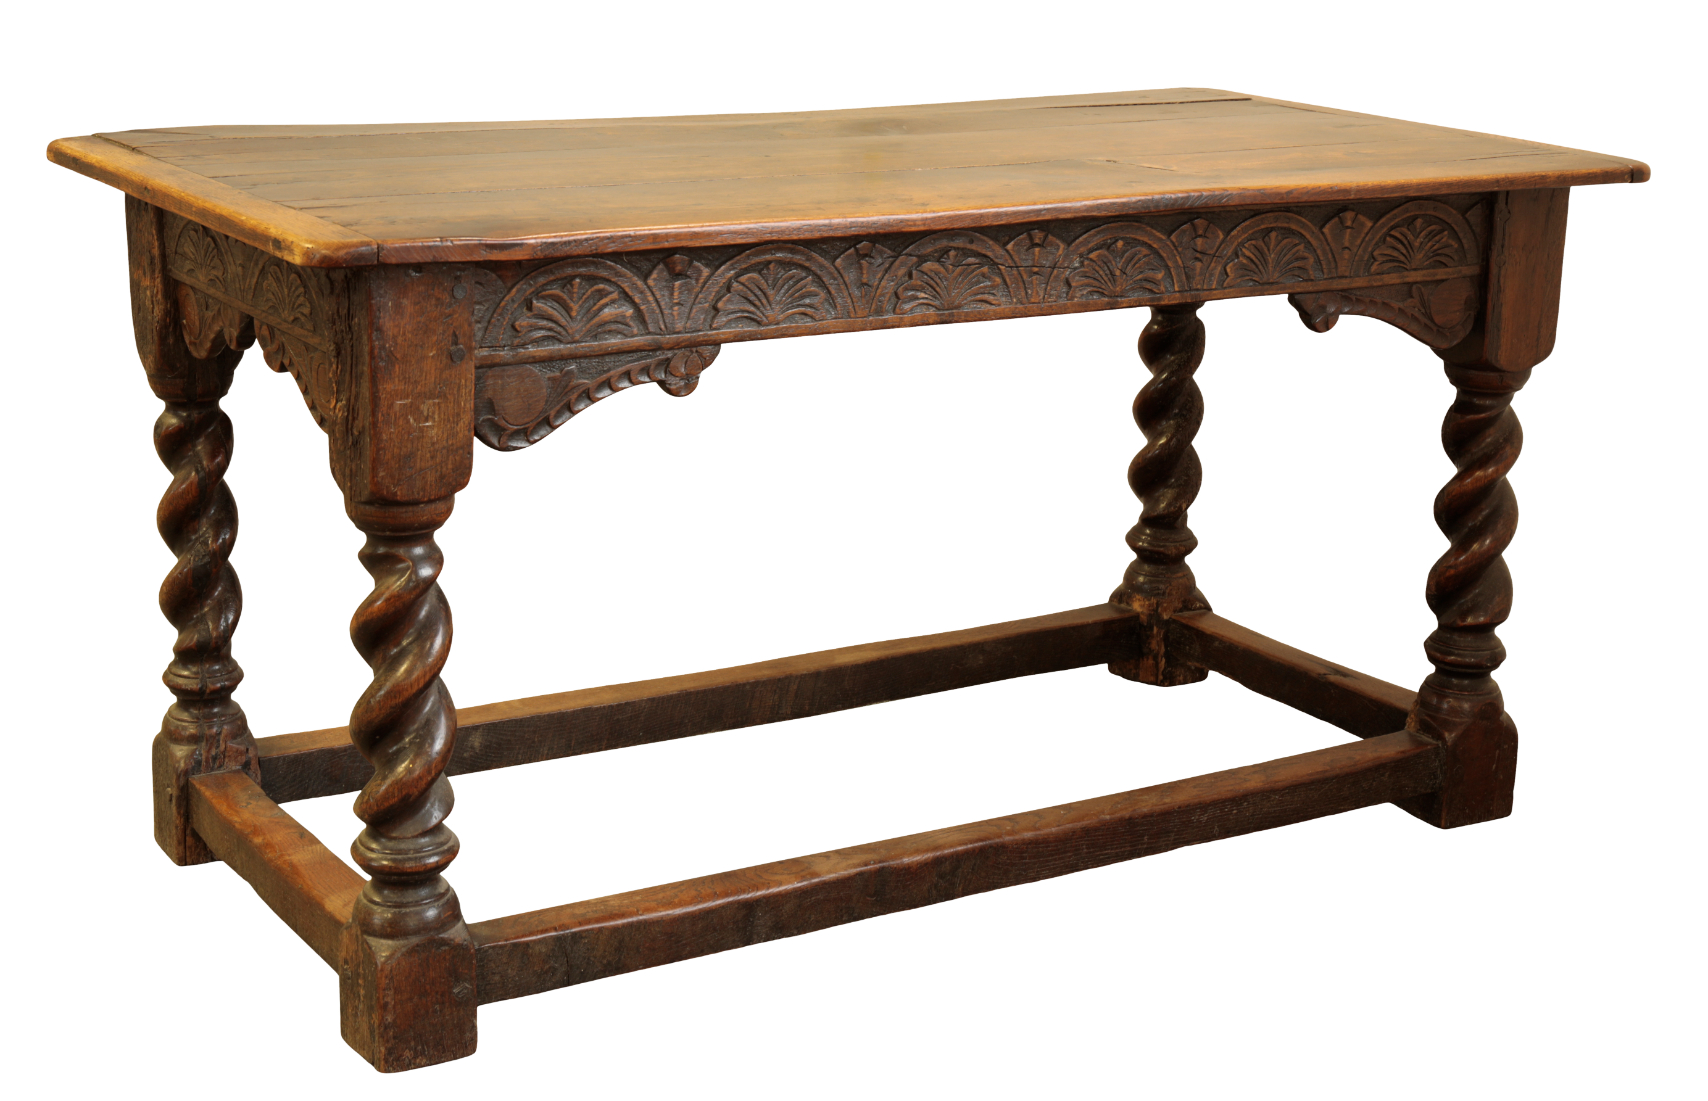 AN OAK REFECTORY TABLE 17th century,